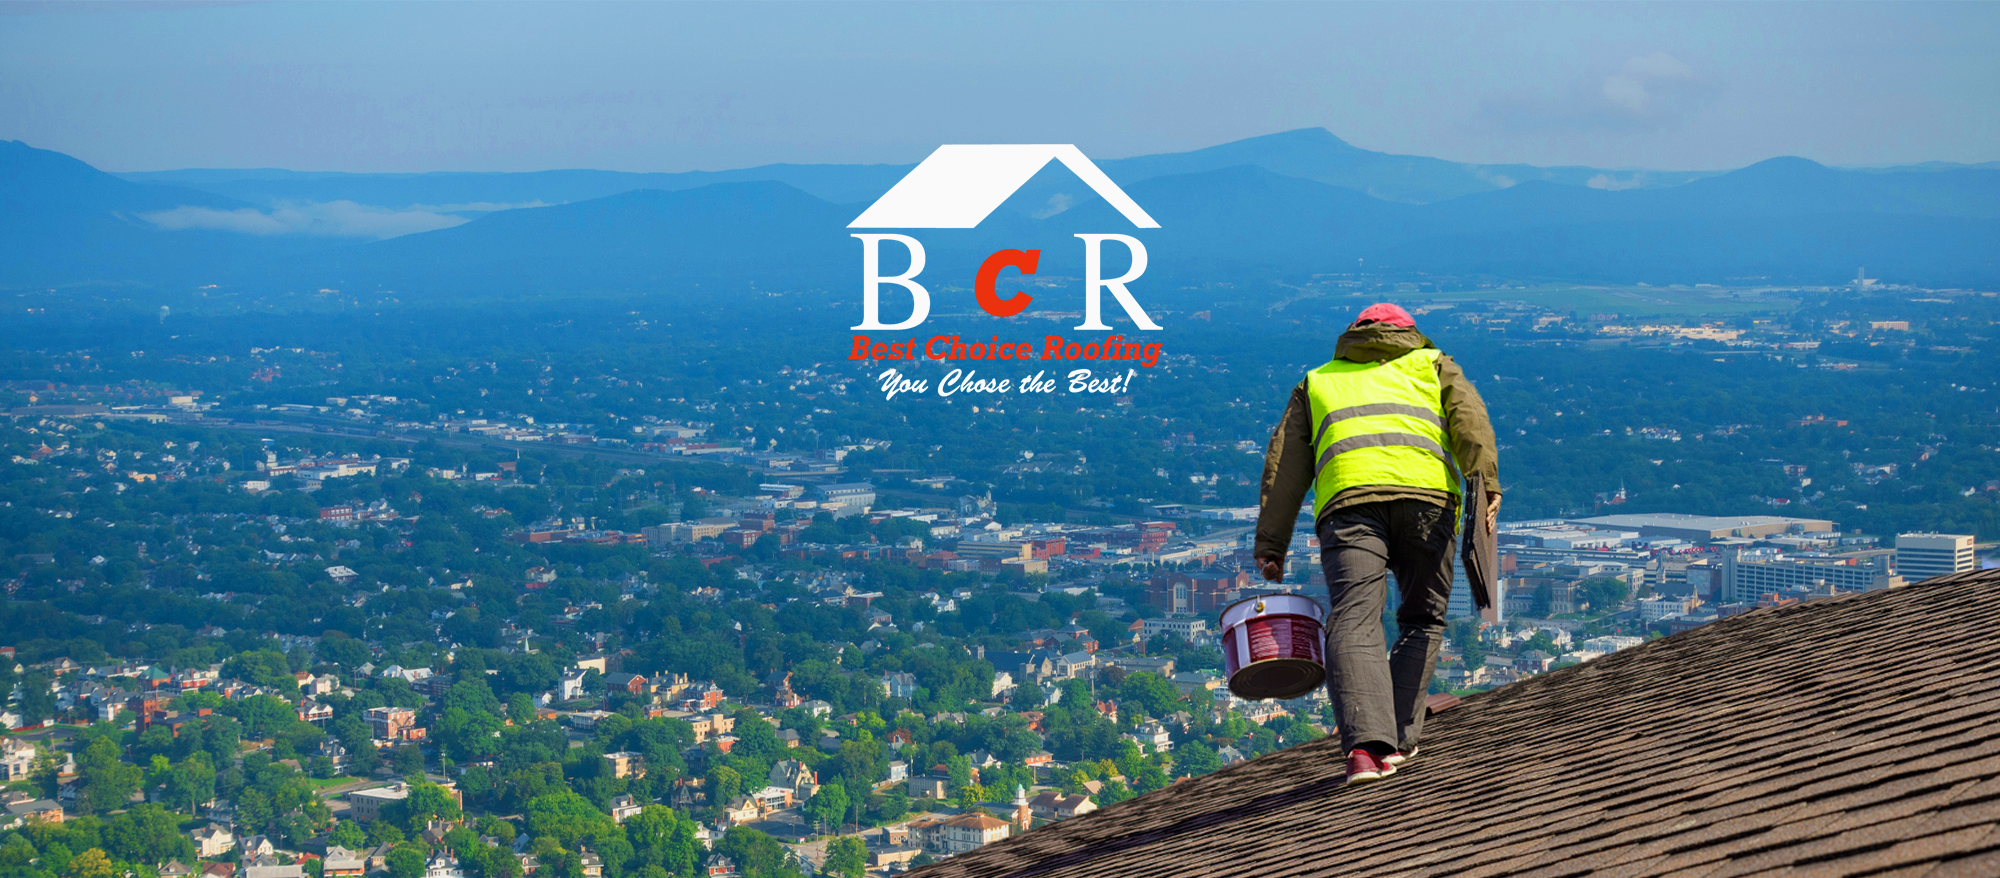 Best Choice Roofing